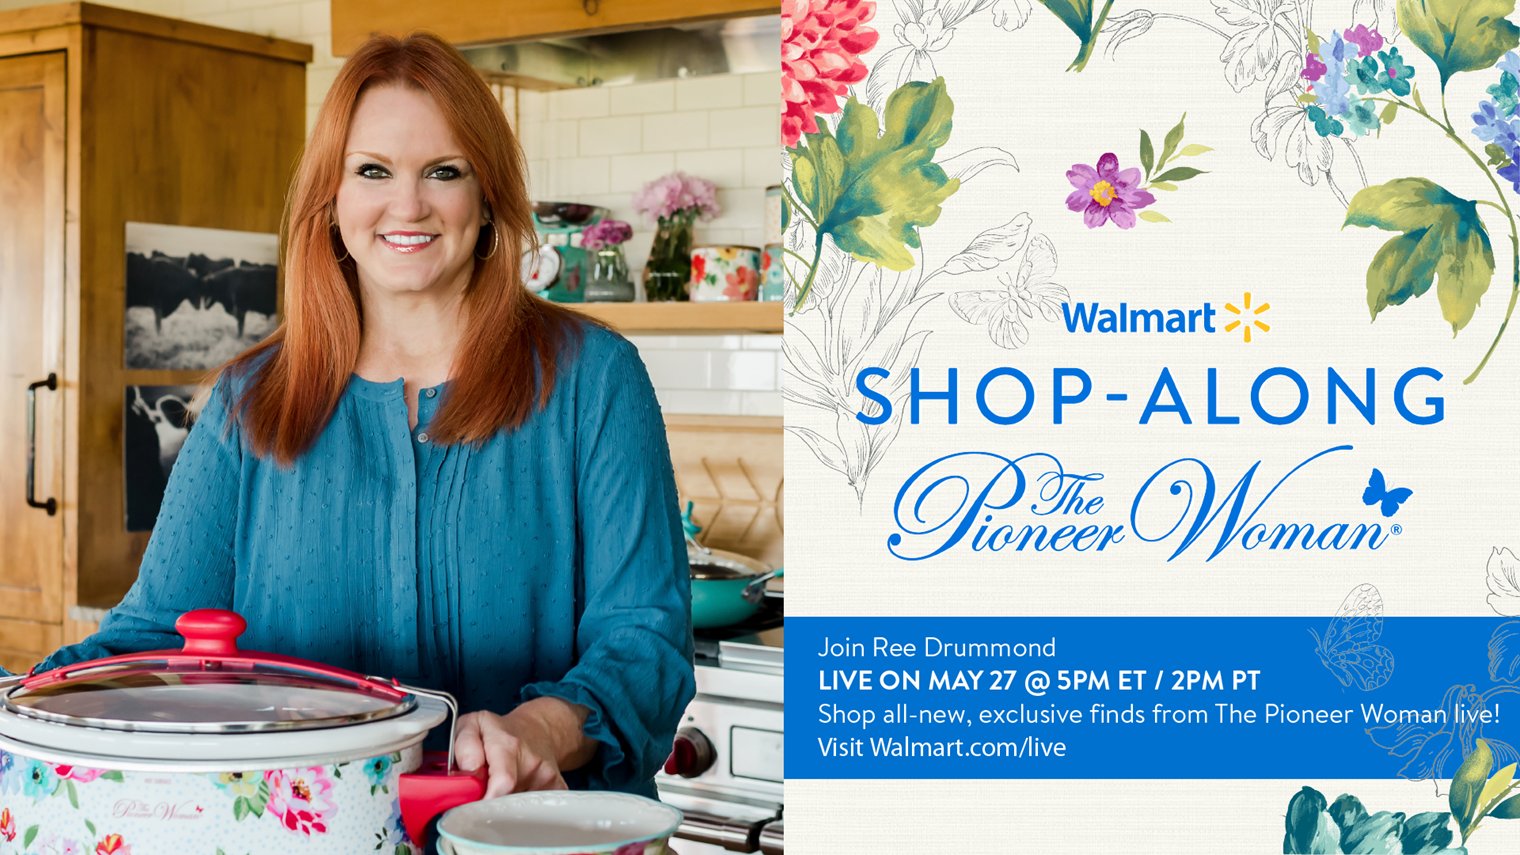 Walmart on X: Ree Drummond is taking you on a Walmart Shop-Along! ❤ this  tweet to join her live May 27 @ 5pm ET/2pm PT to see exclusive must-haves  from The Pioneer